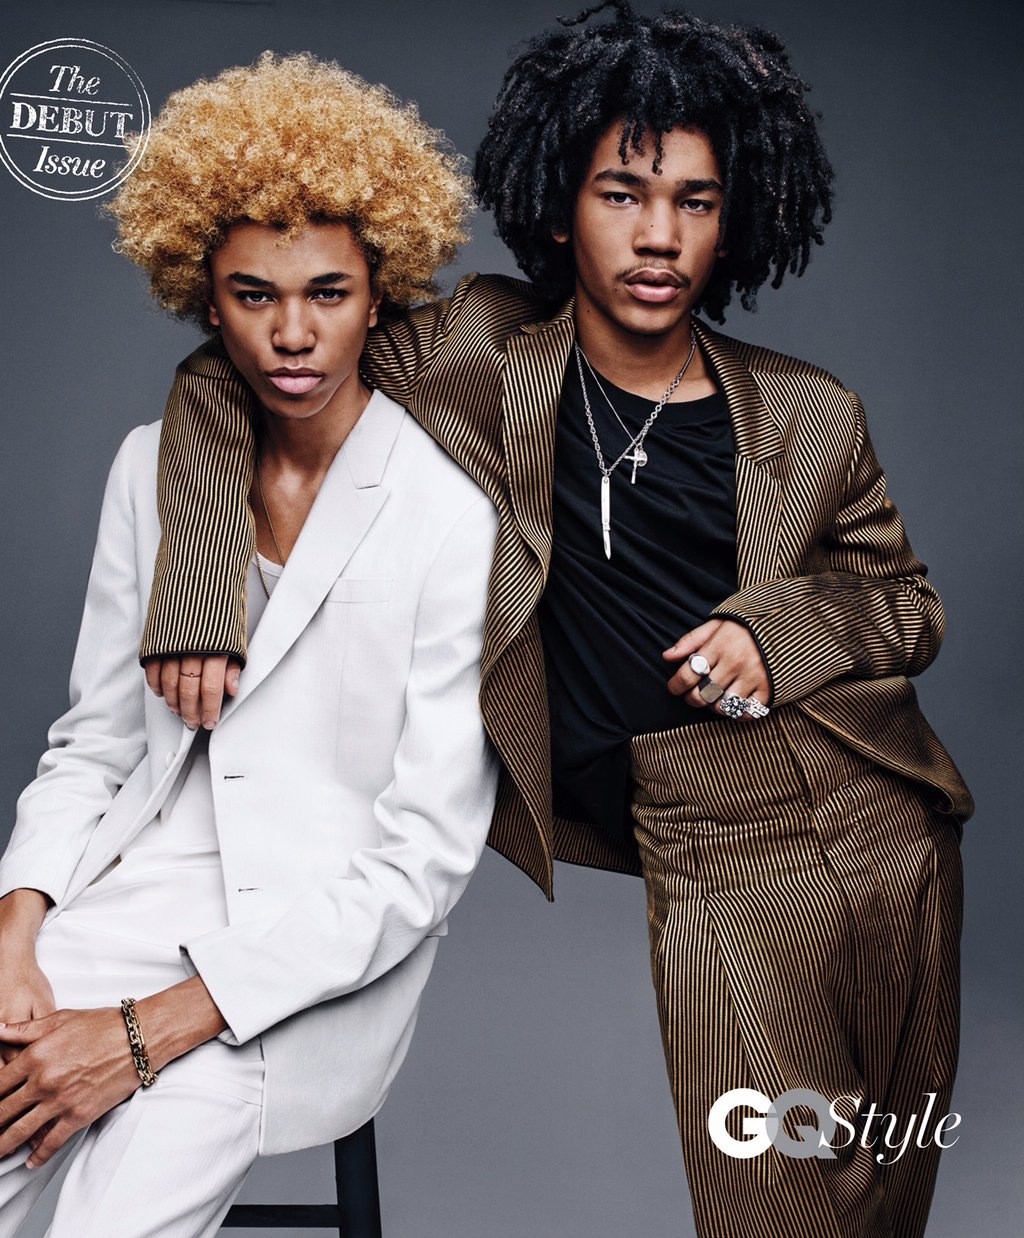 GQ Style Debut Issue Cover Featuring Michael Lockley & Luka Sabbat